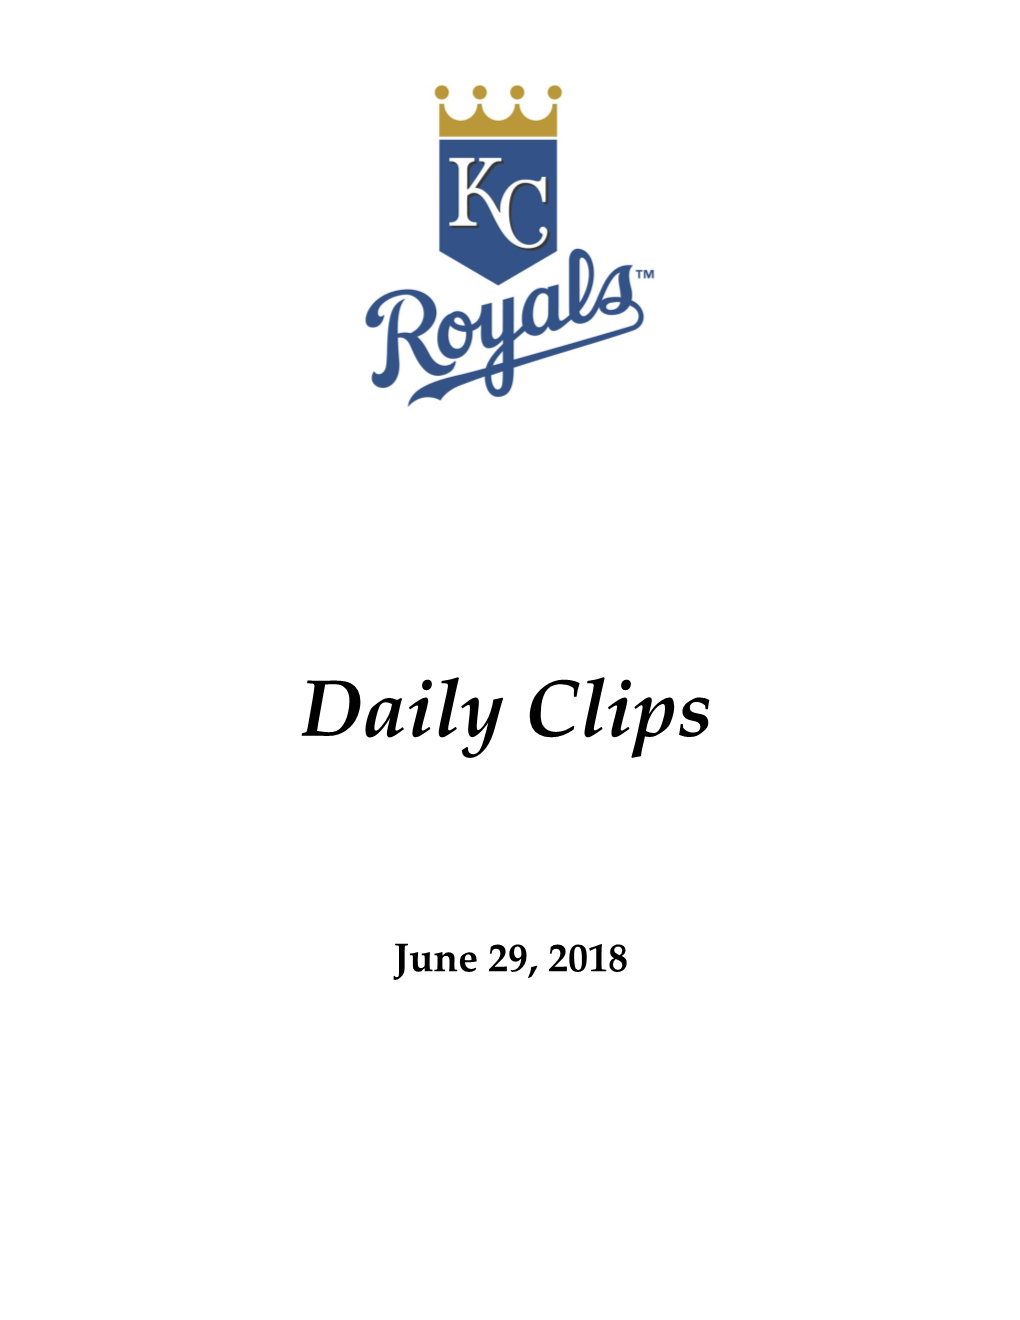 Inbox: Who Might Royals Move at Deadline?